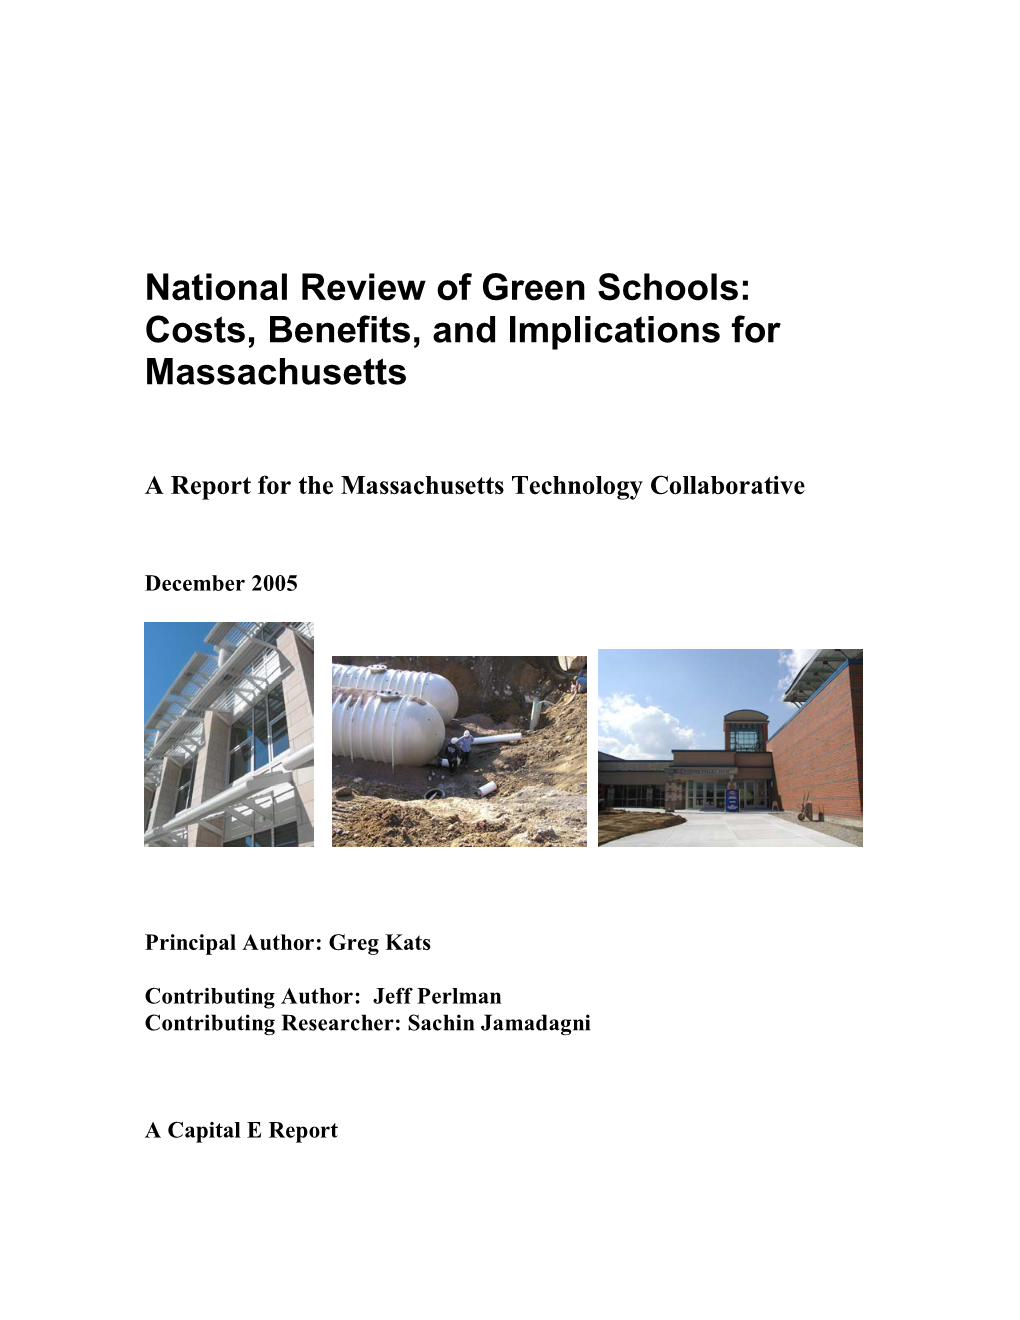 National Review of Green Schools: Costs, Benefits, and Implications for Massachusetts